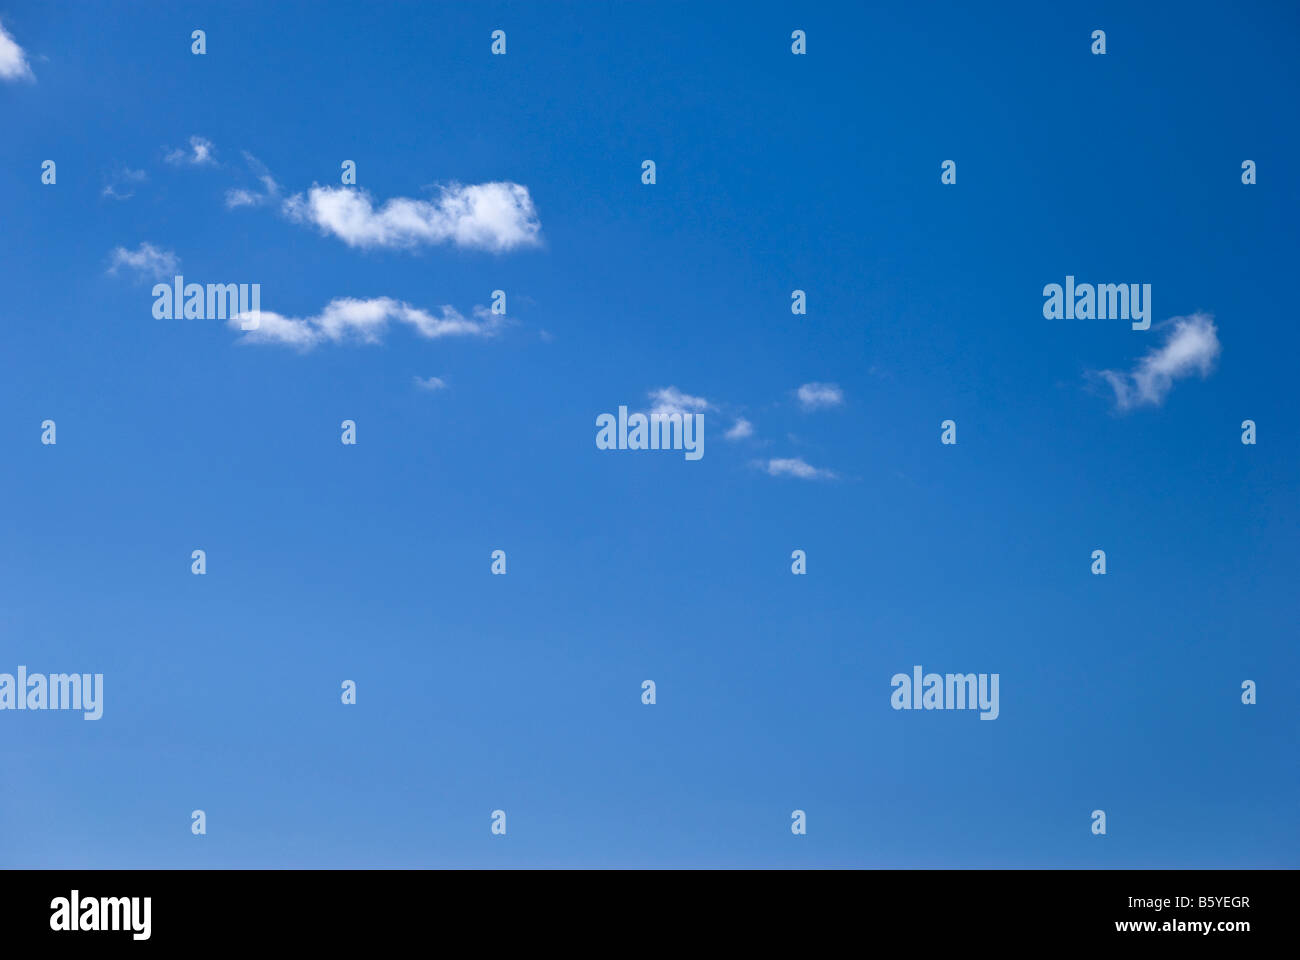 A line of fluffy or cotton wool like clouds float against a perfect clear blue sky Stock Photo